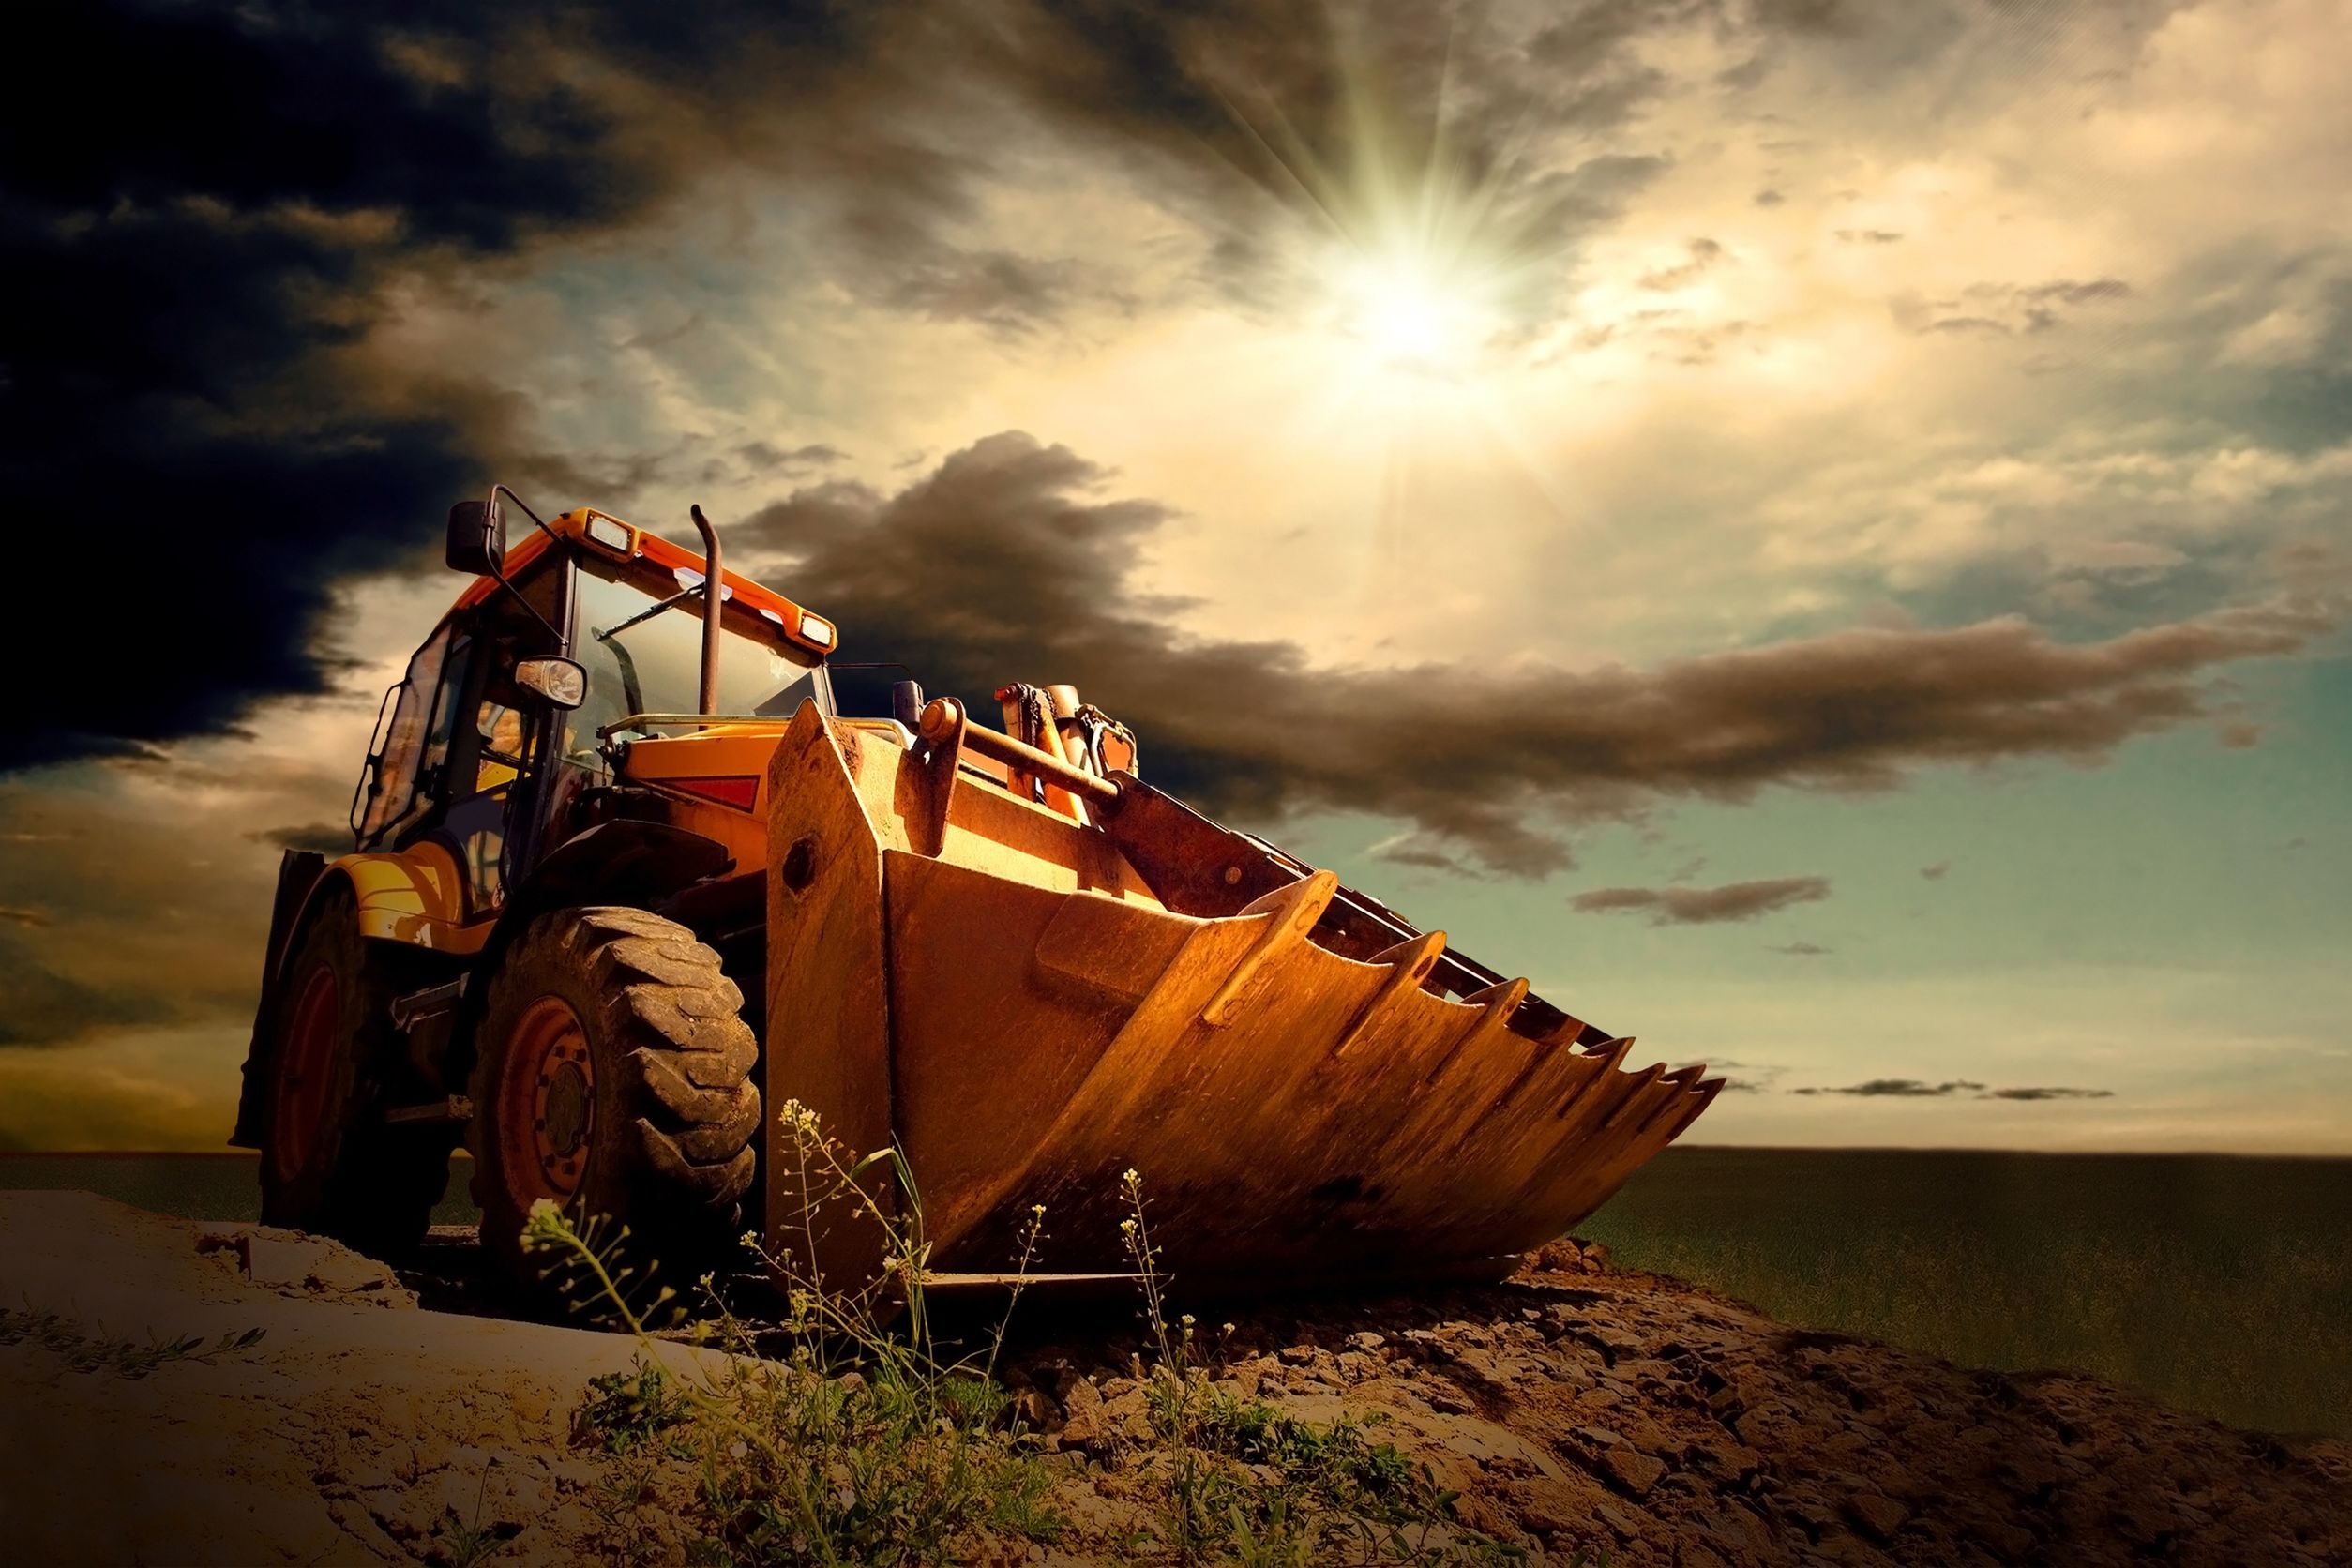 20215922 - yellow tractor on sky background